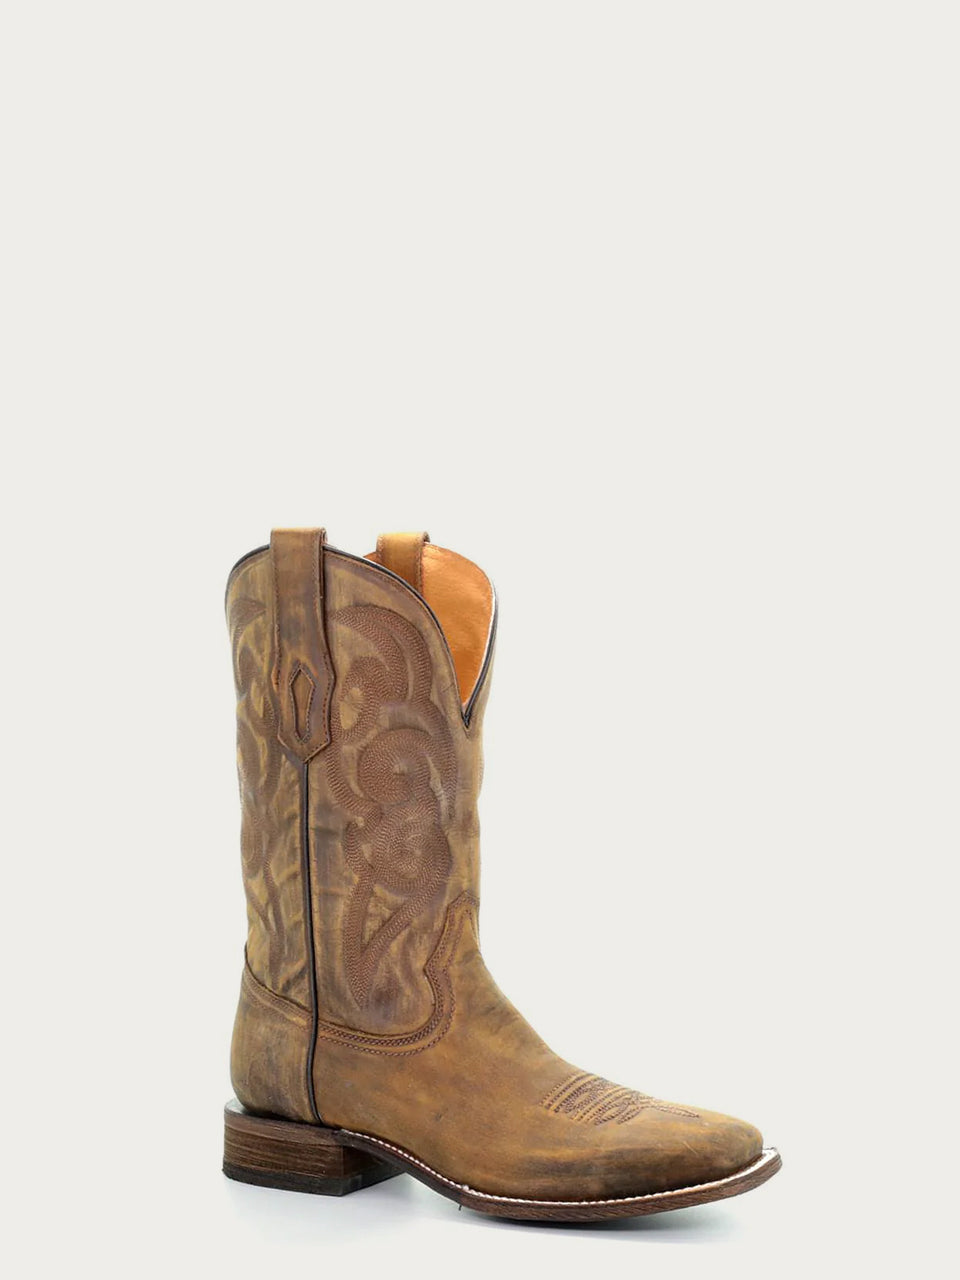 Cowboy boot Golden Embroidery Sq. Toe  leather is hand sanded and accented with a subtle yet distinct embroidery side view